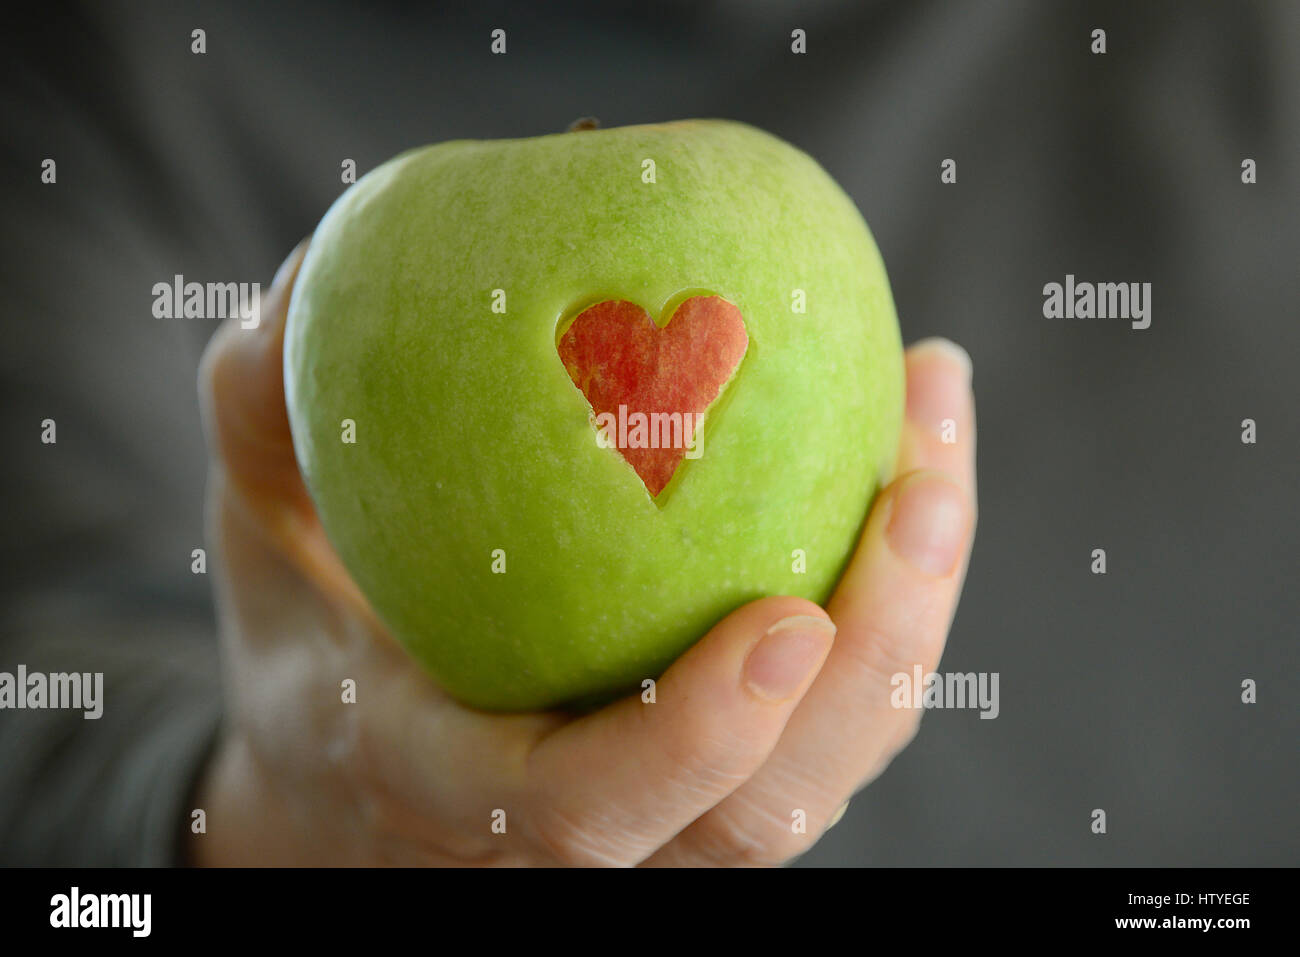 Woman's hand holding a Green Apple avec coeur rouge Banque D'Images